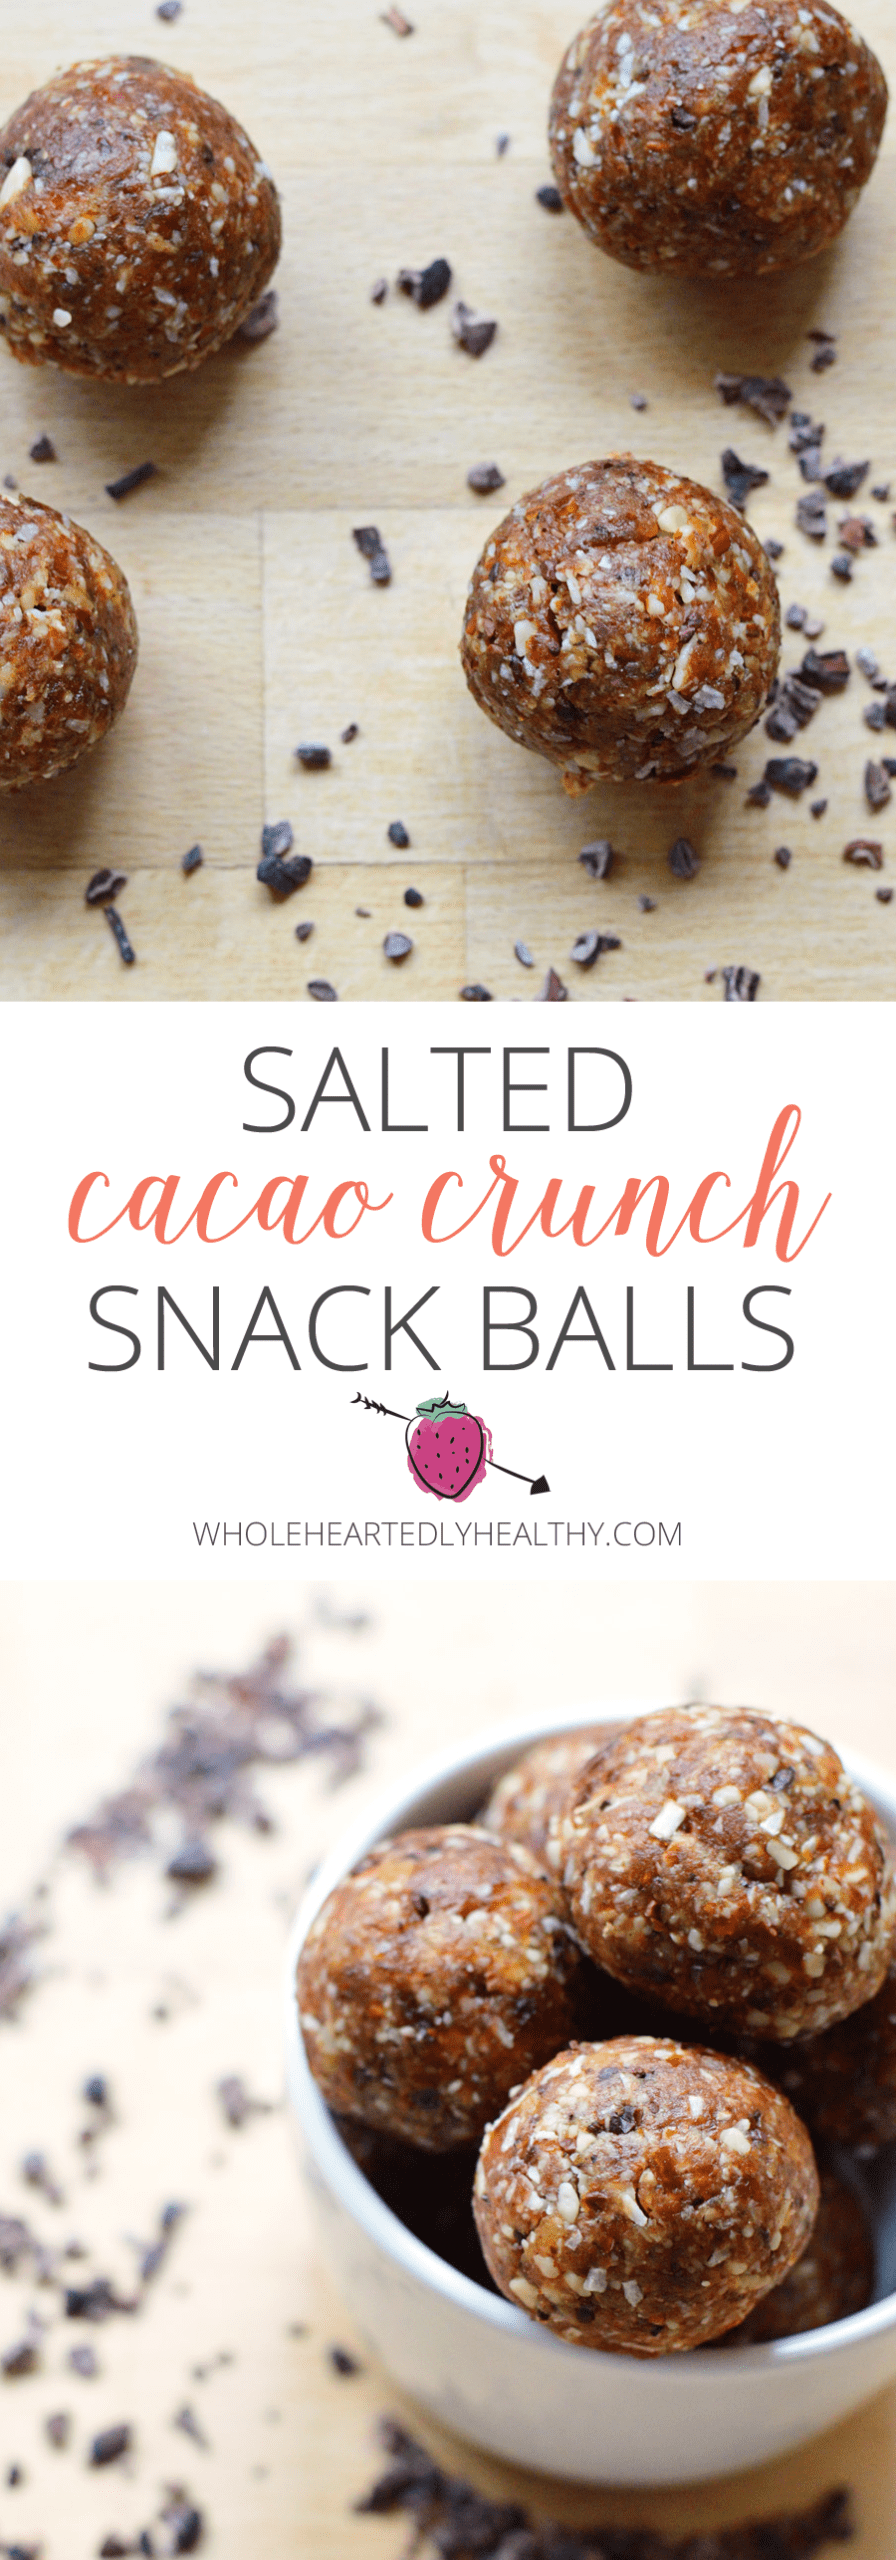 Salted cacao crunch snack balls recipe